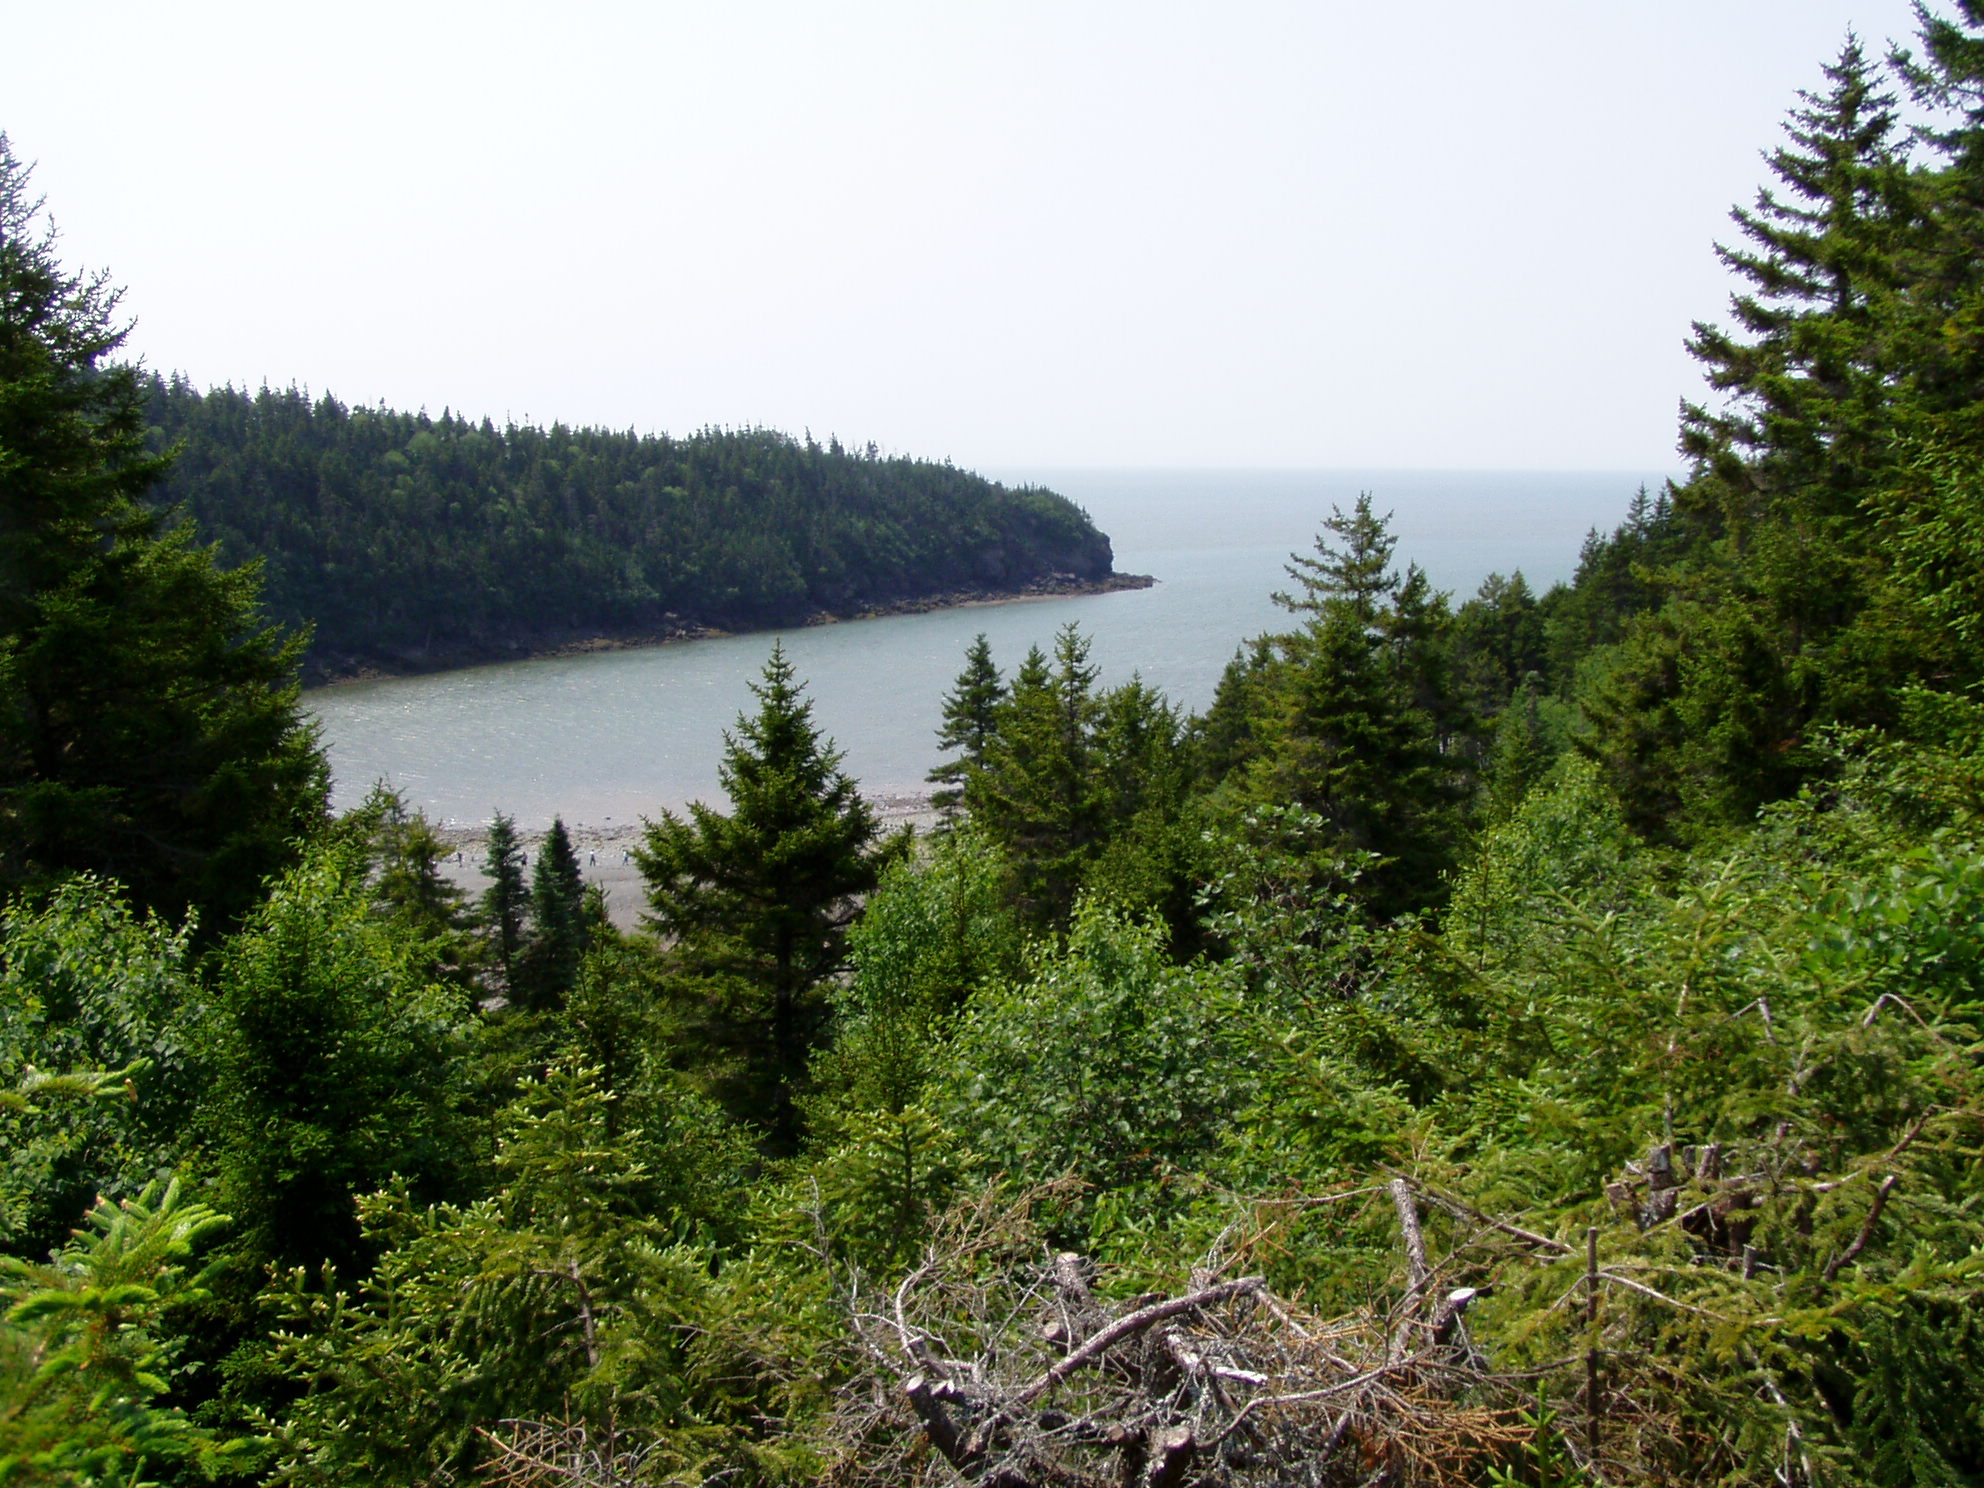 File:Fundy National Park of Canada 1.jpg - Wikimedia Commons